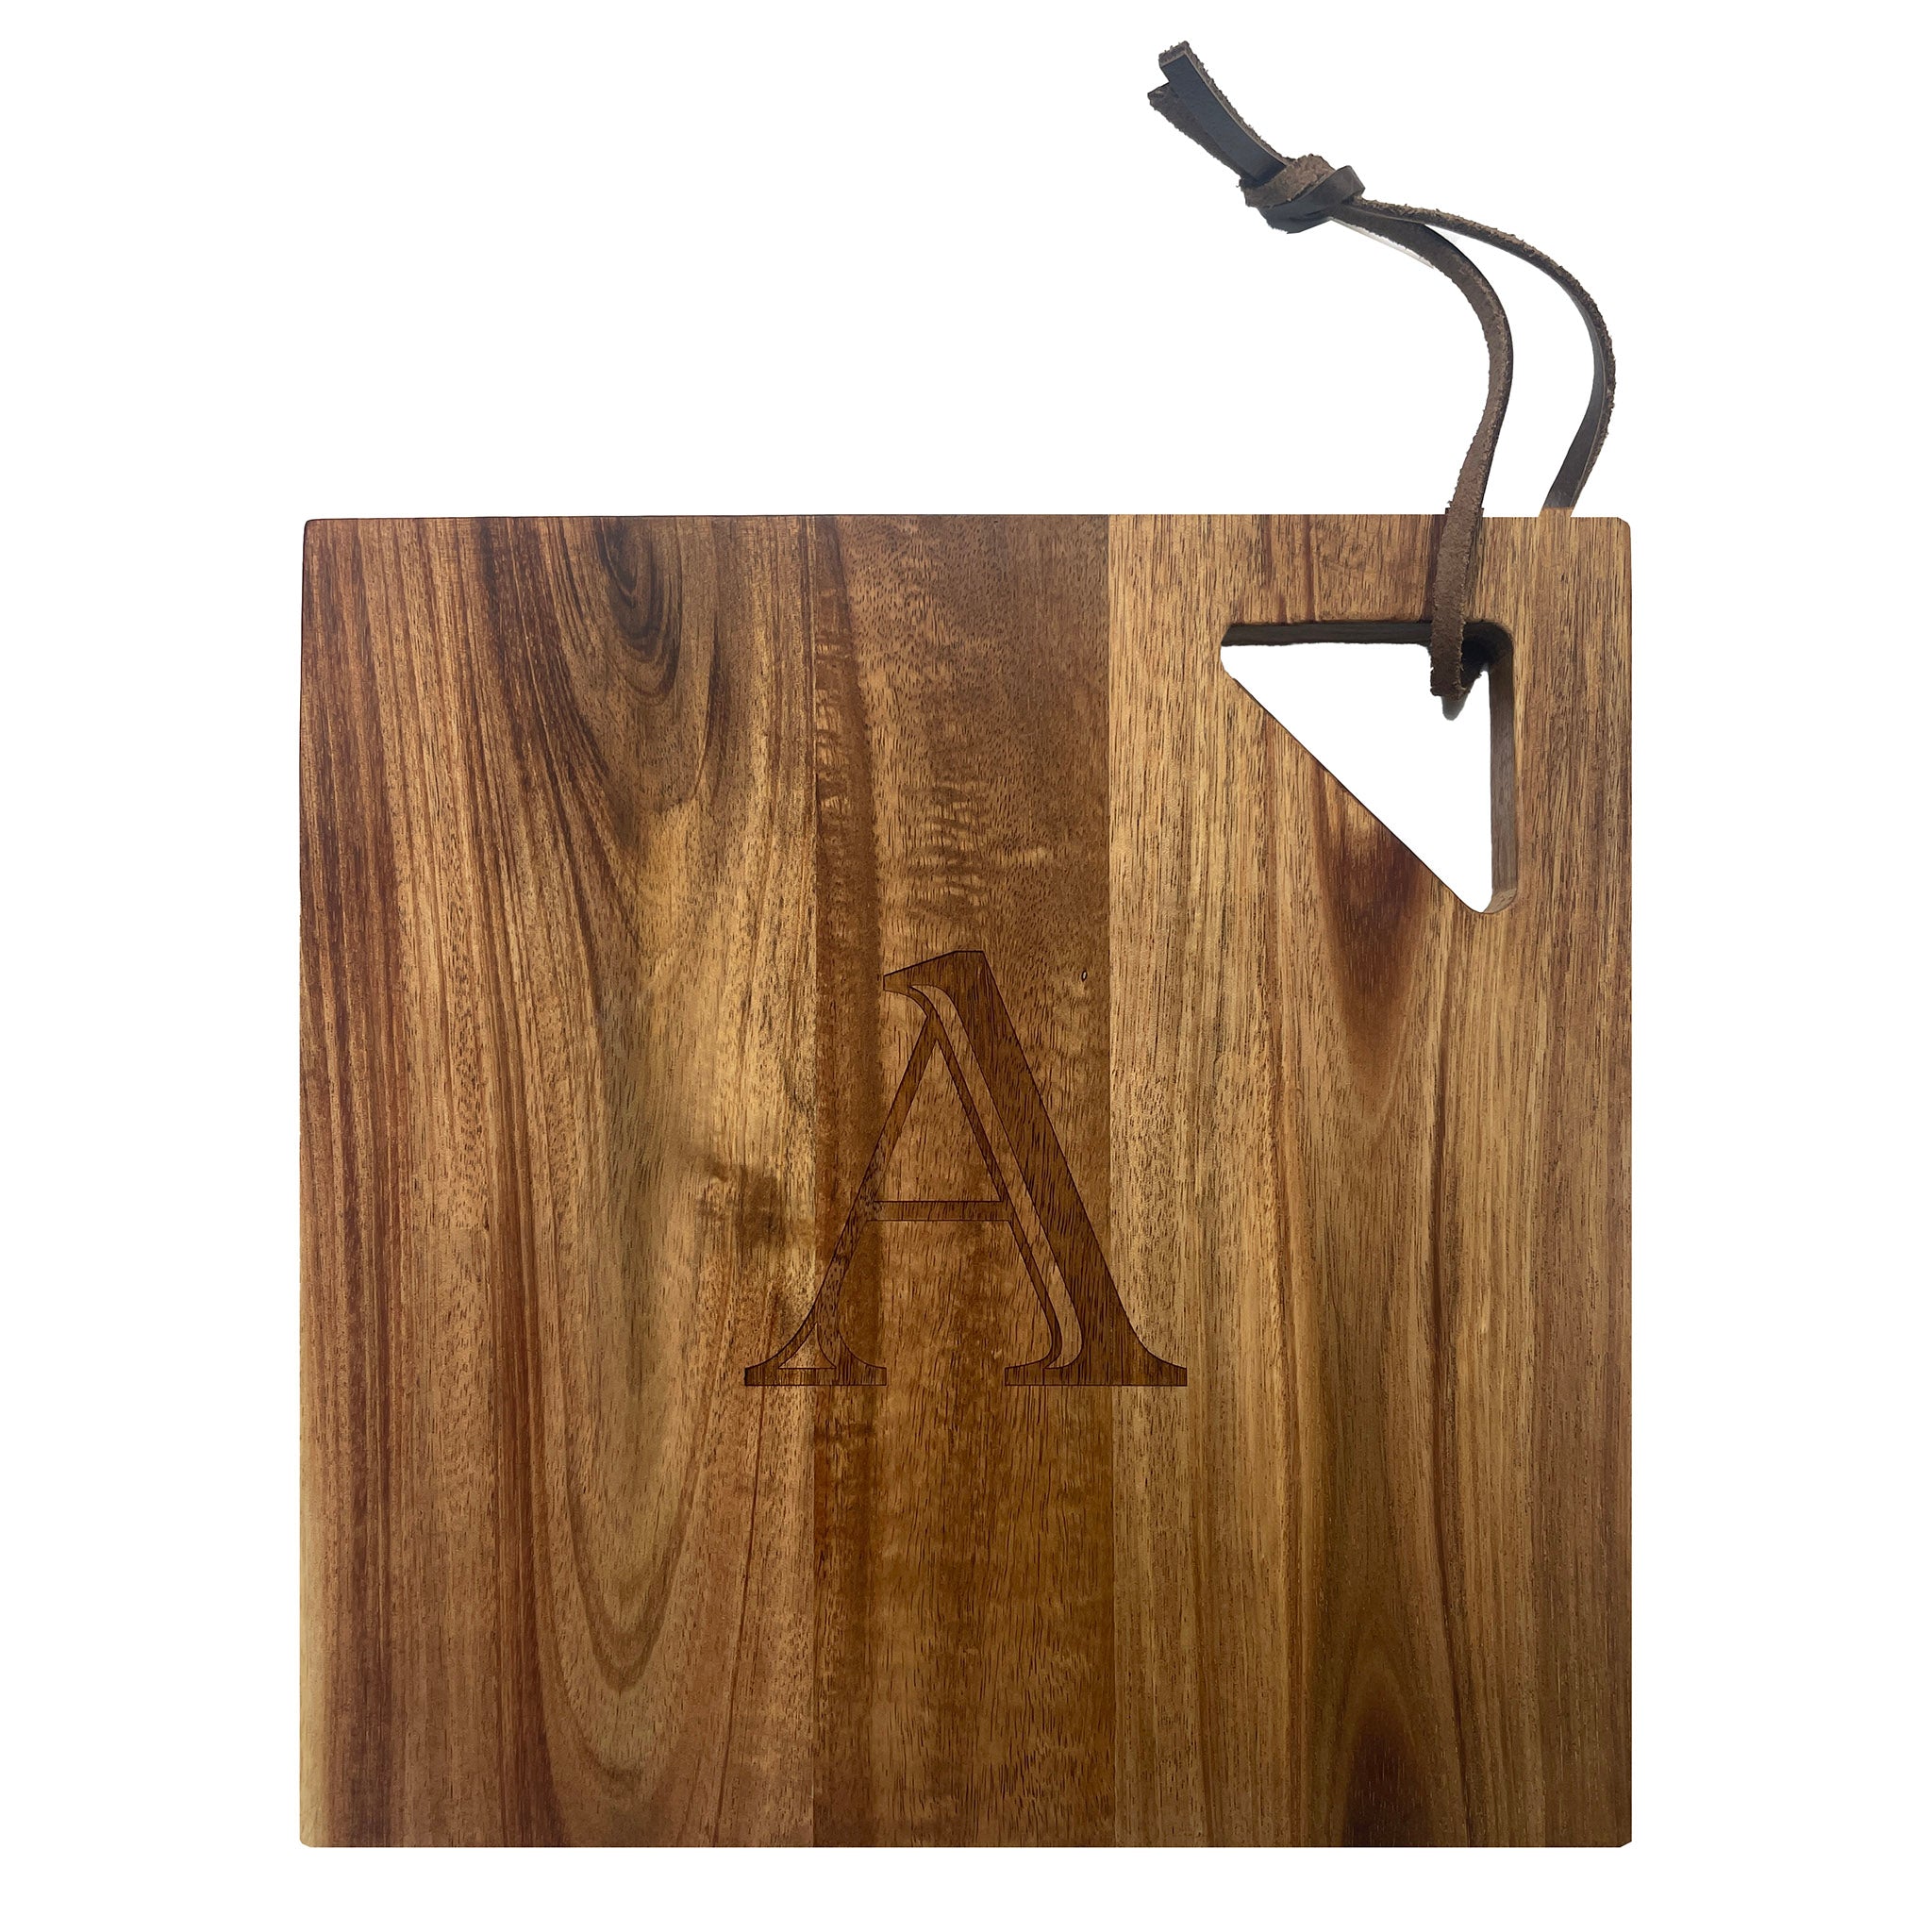 Acacia Cutting Board with Cut Out Handle, Large